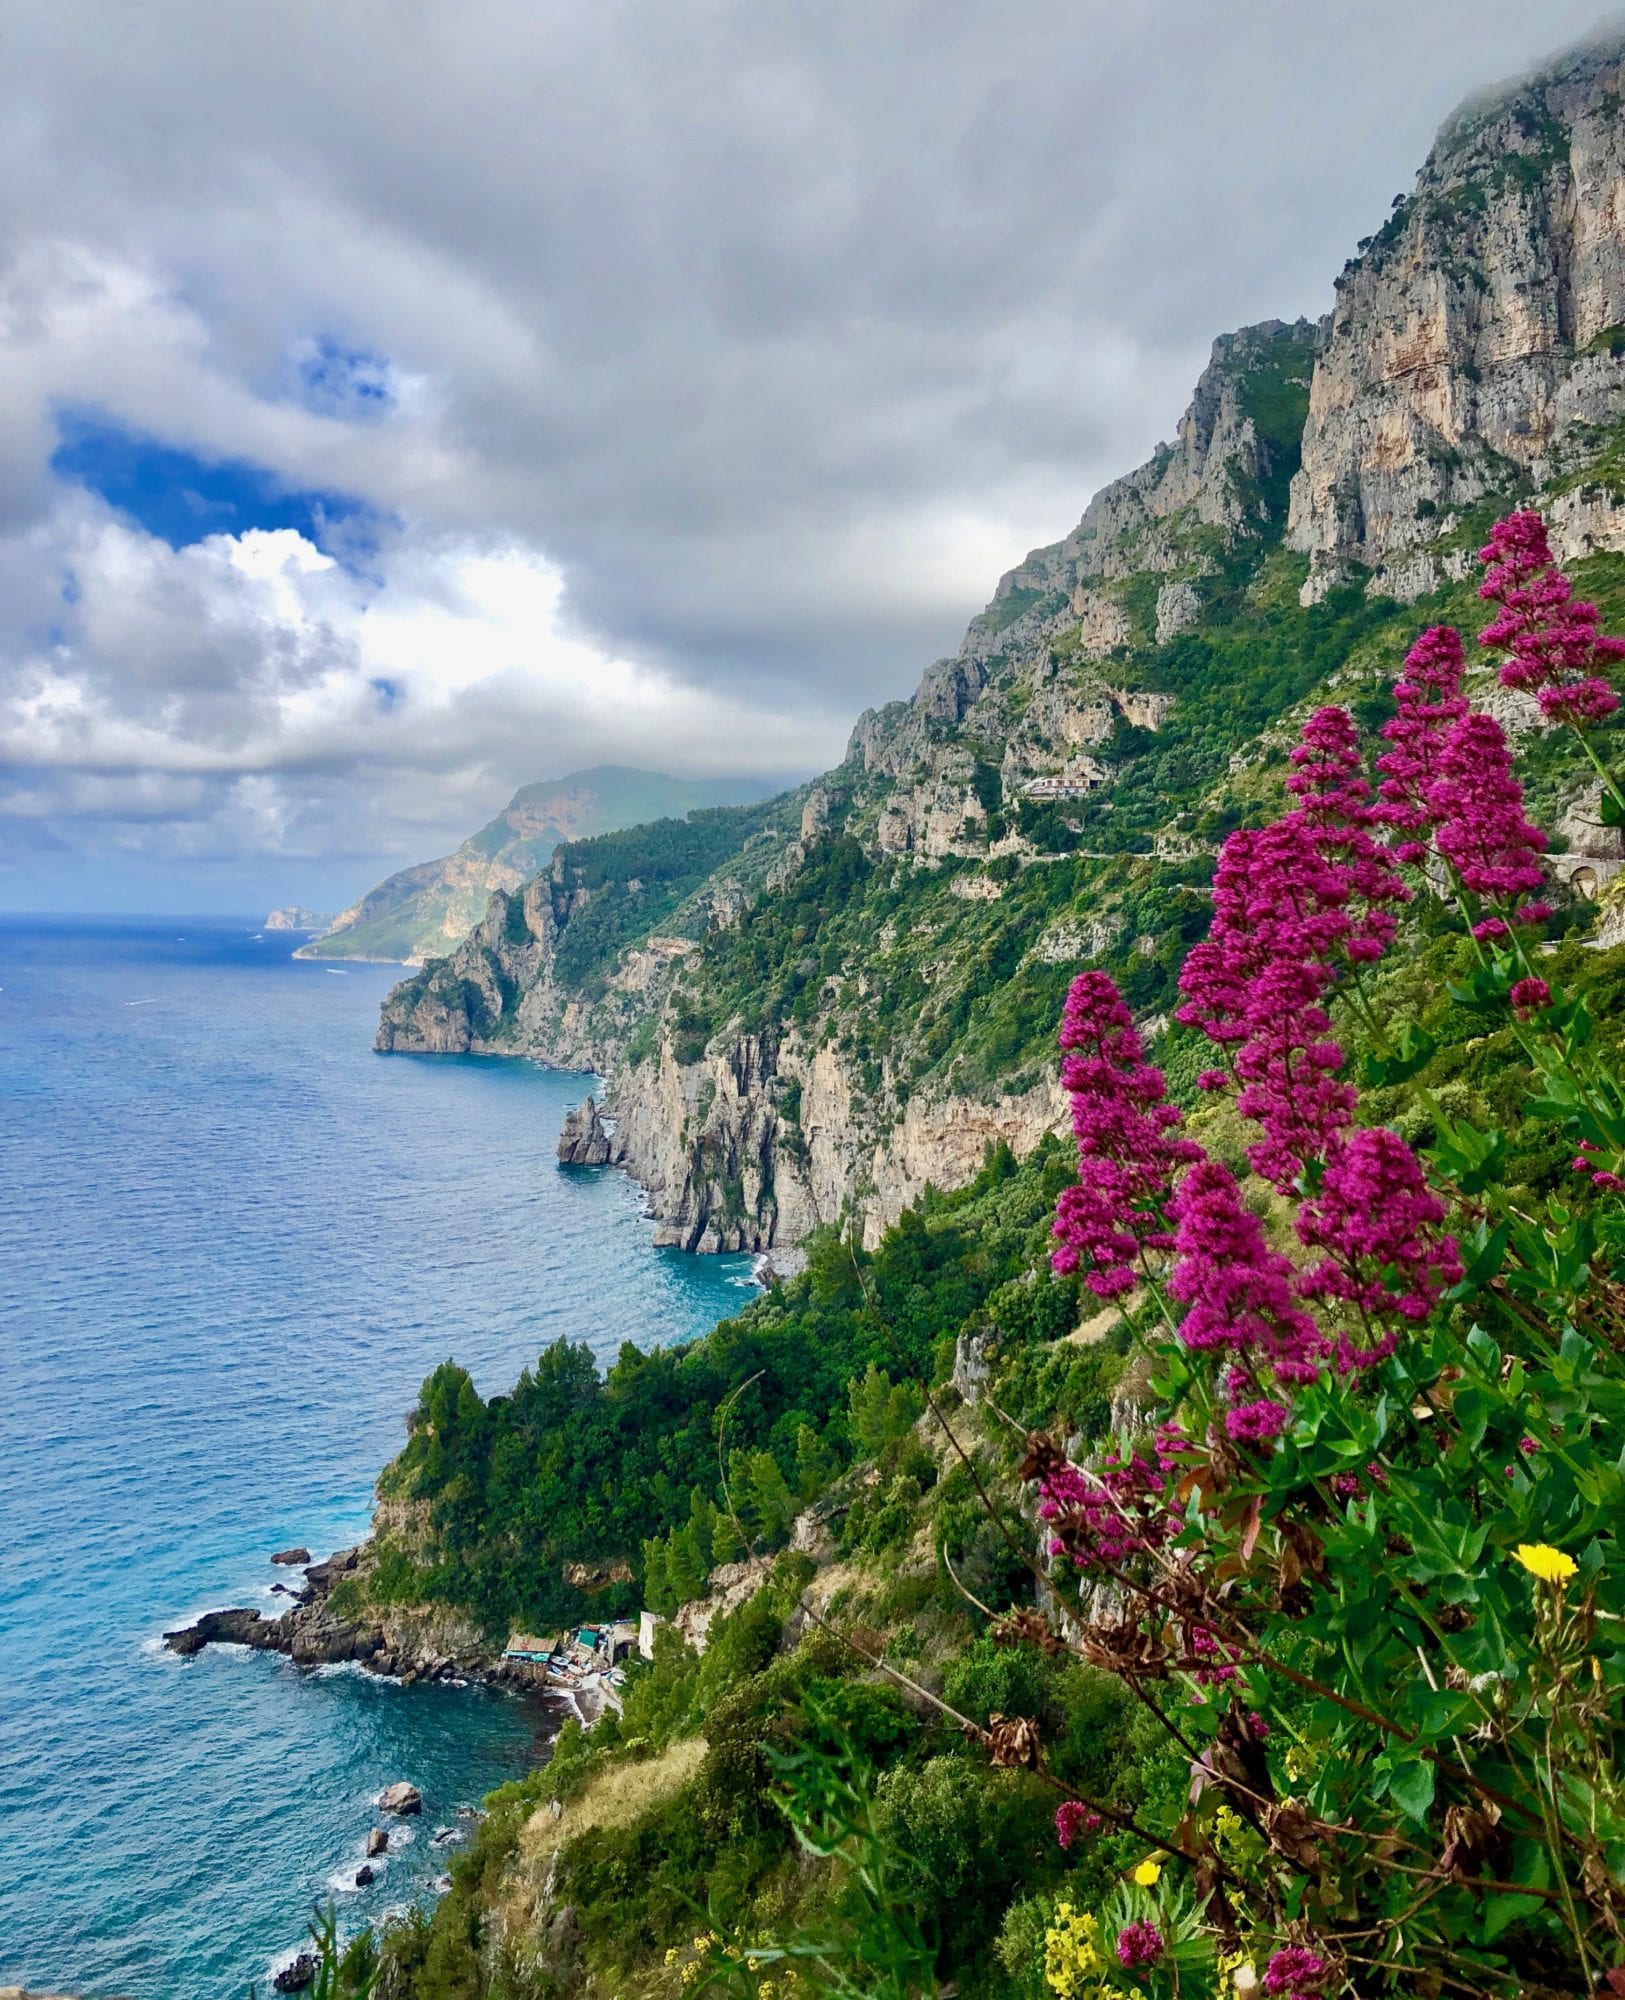 beautiful cliffs oceanside with fucia flowers growing